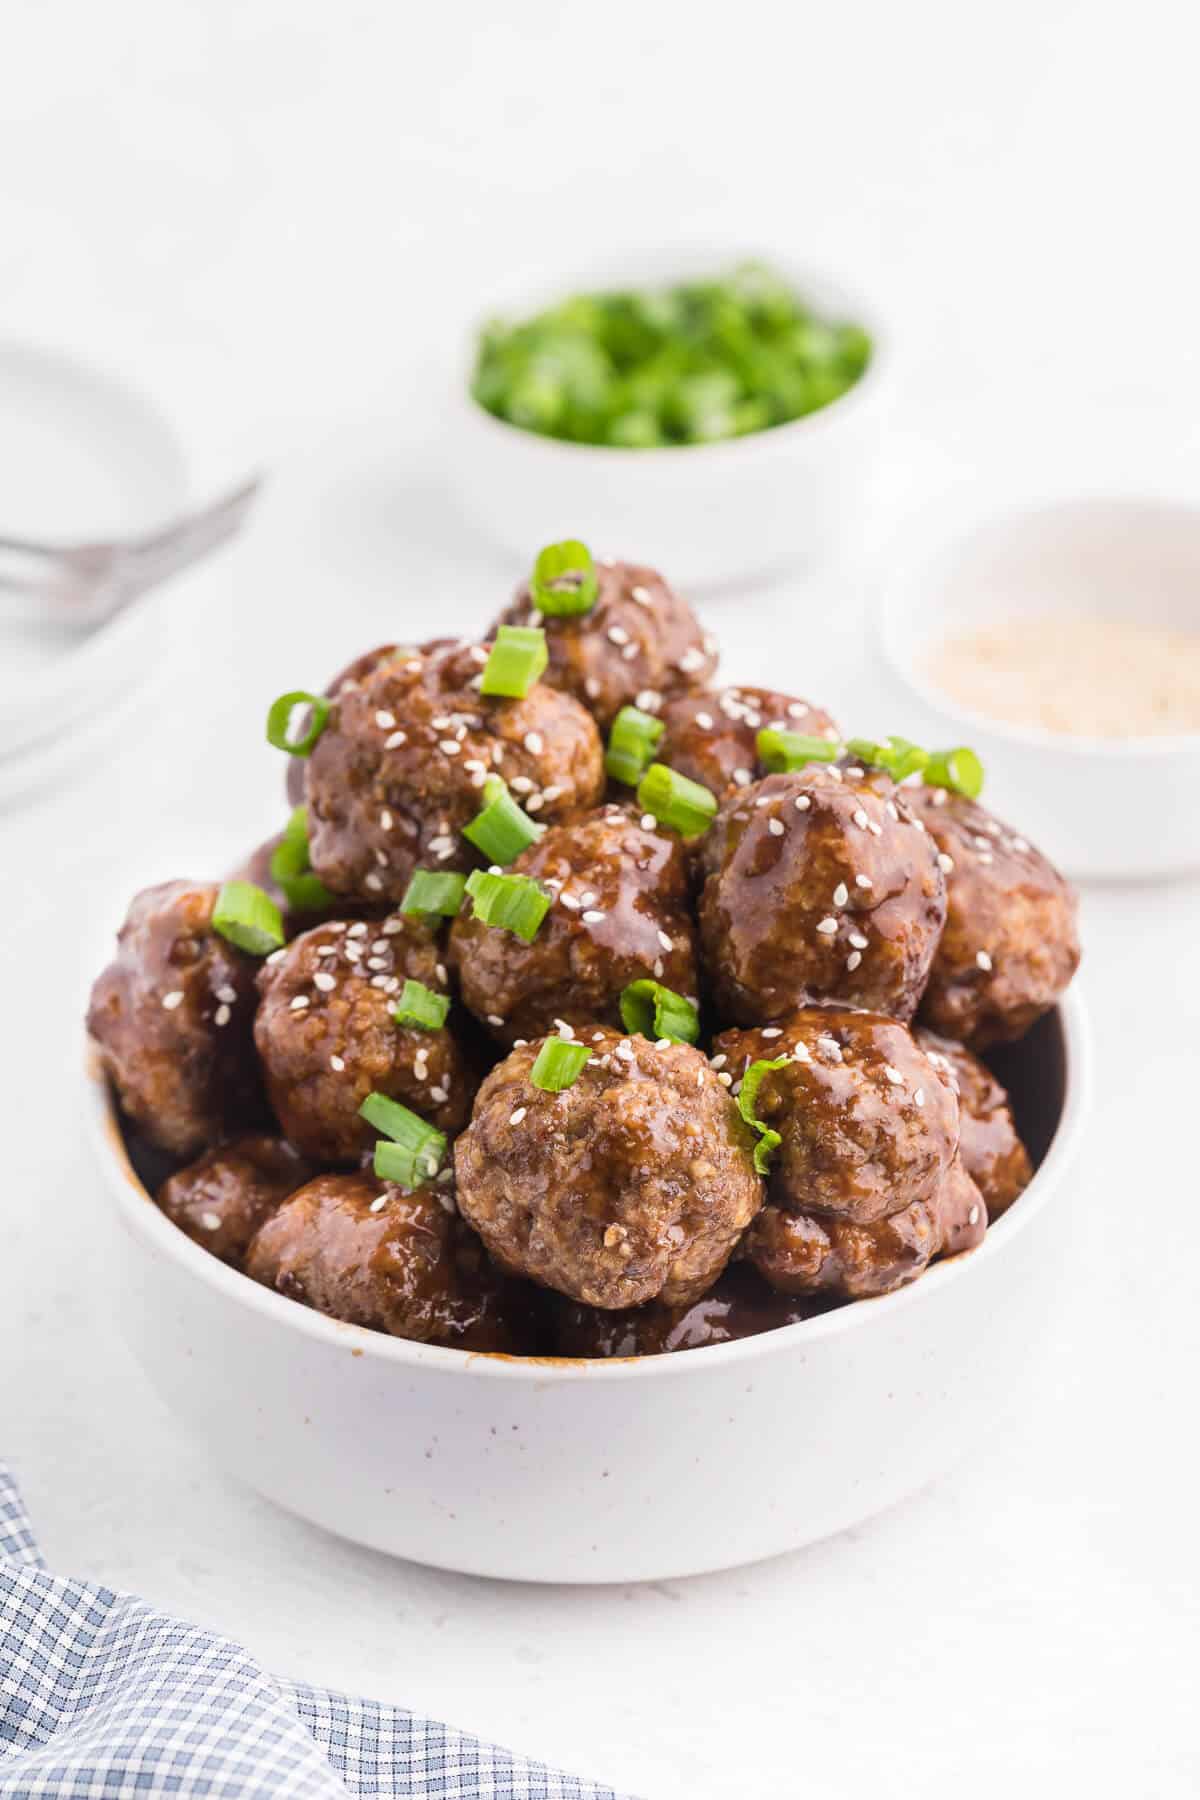 Ginger Meatballs - Add this Asian meatball recipe to your next party menu! Homemade beef meatballs with zesty ginger are smothered in sweet and tangy stir fry sauce. Yum!